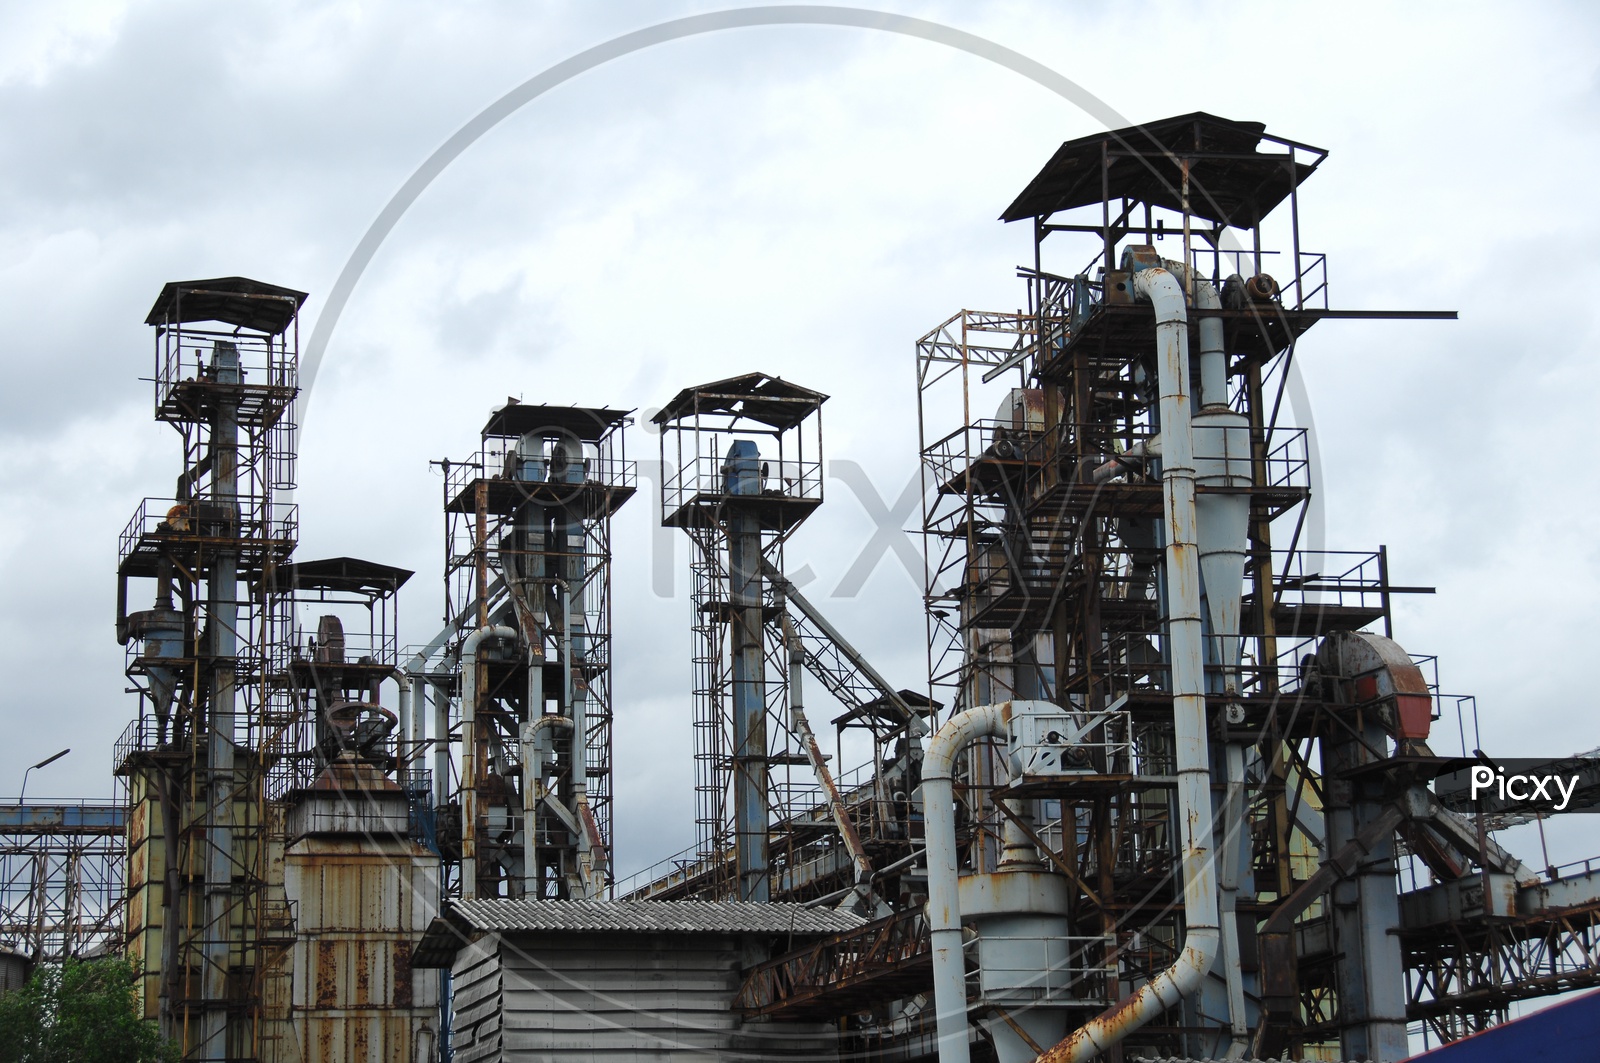 An Industry With Towers And Iron Structures